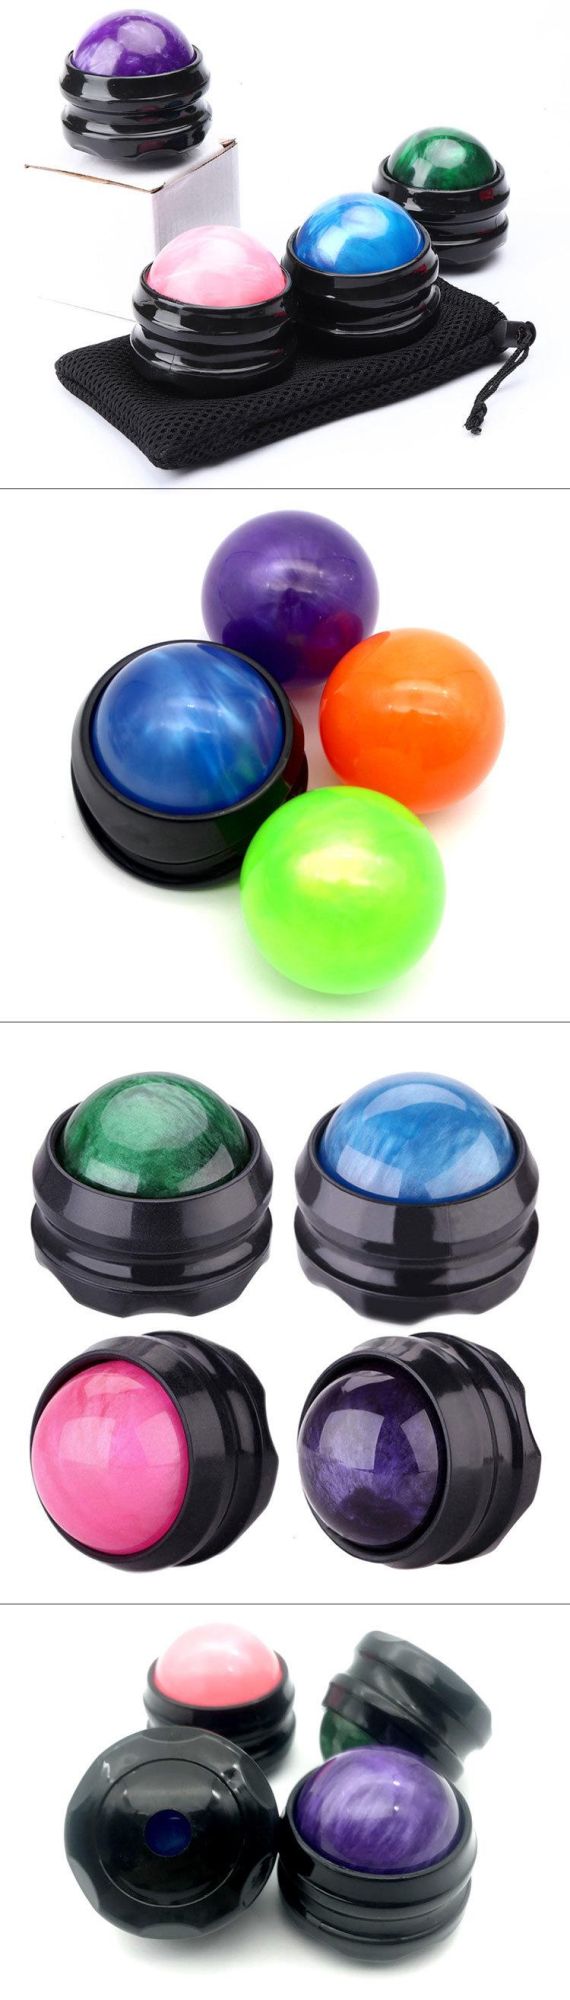 Hot Sale Body Therapy Cold Massage Roller Ball Massage Ball Roller